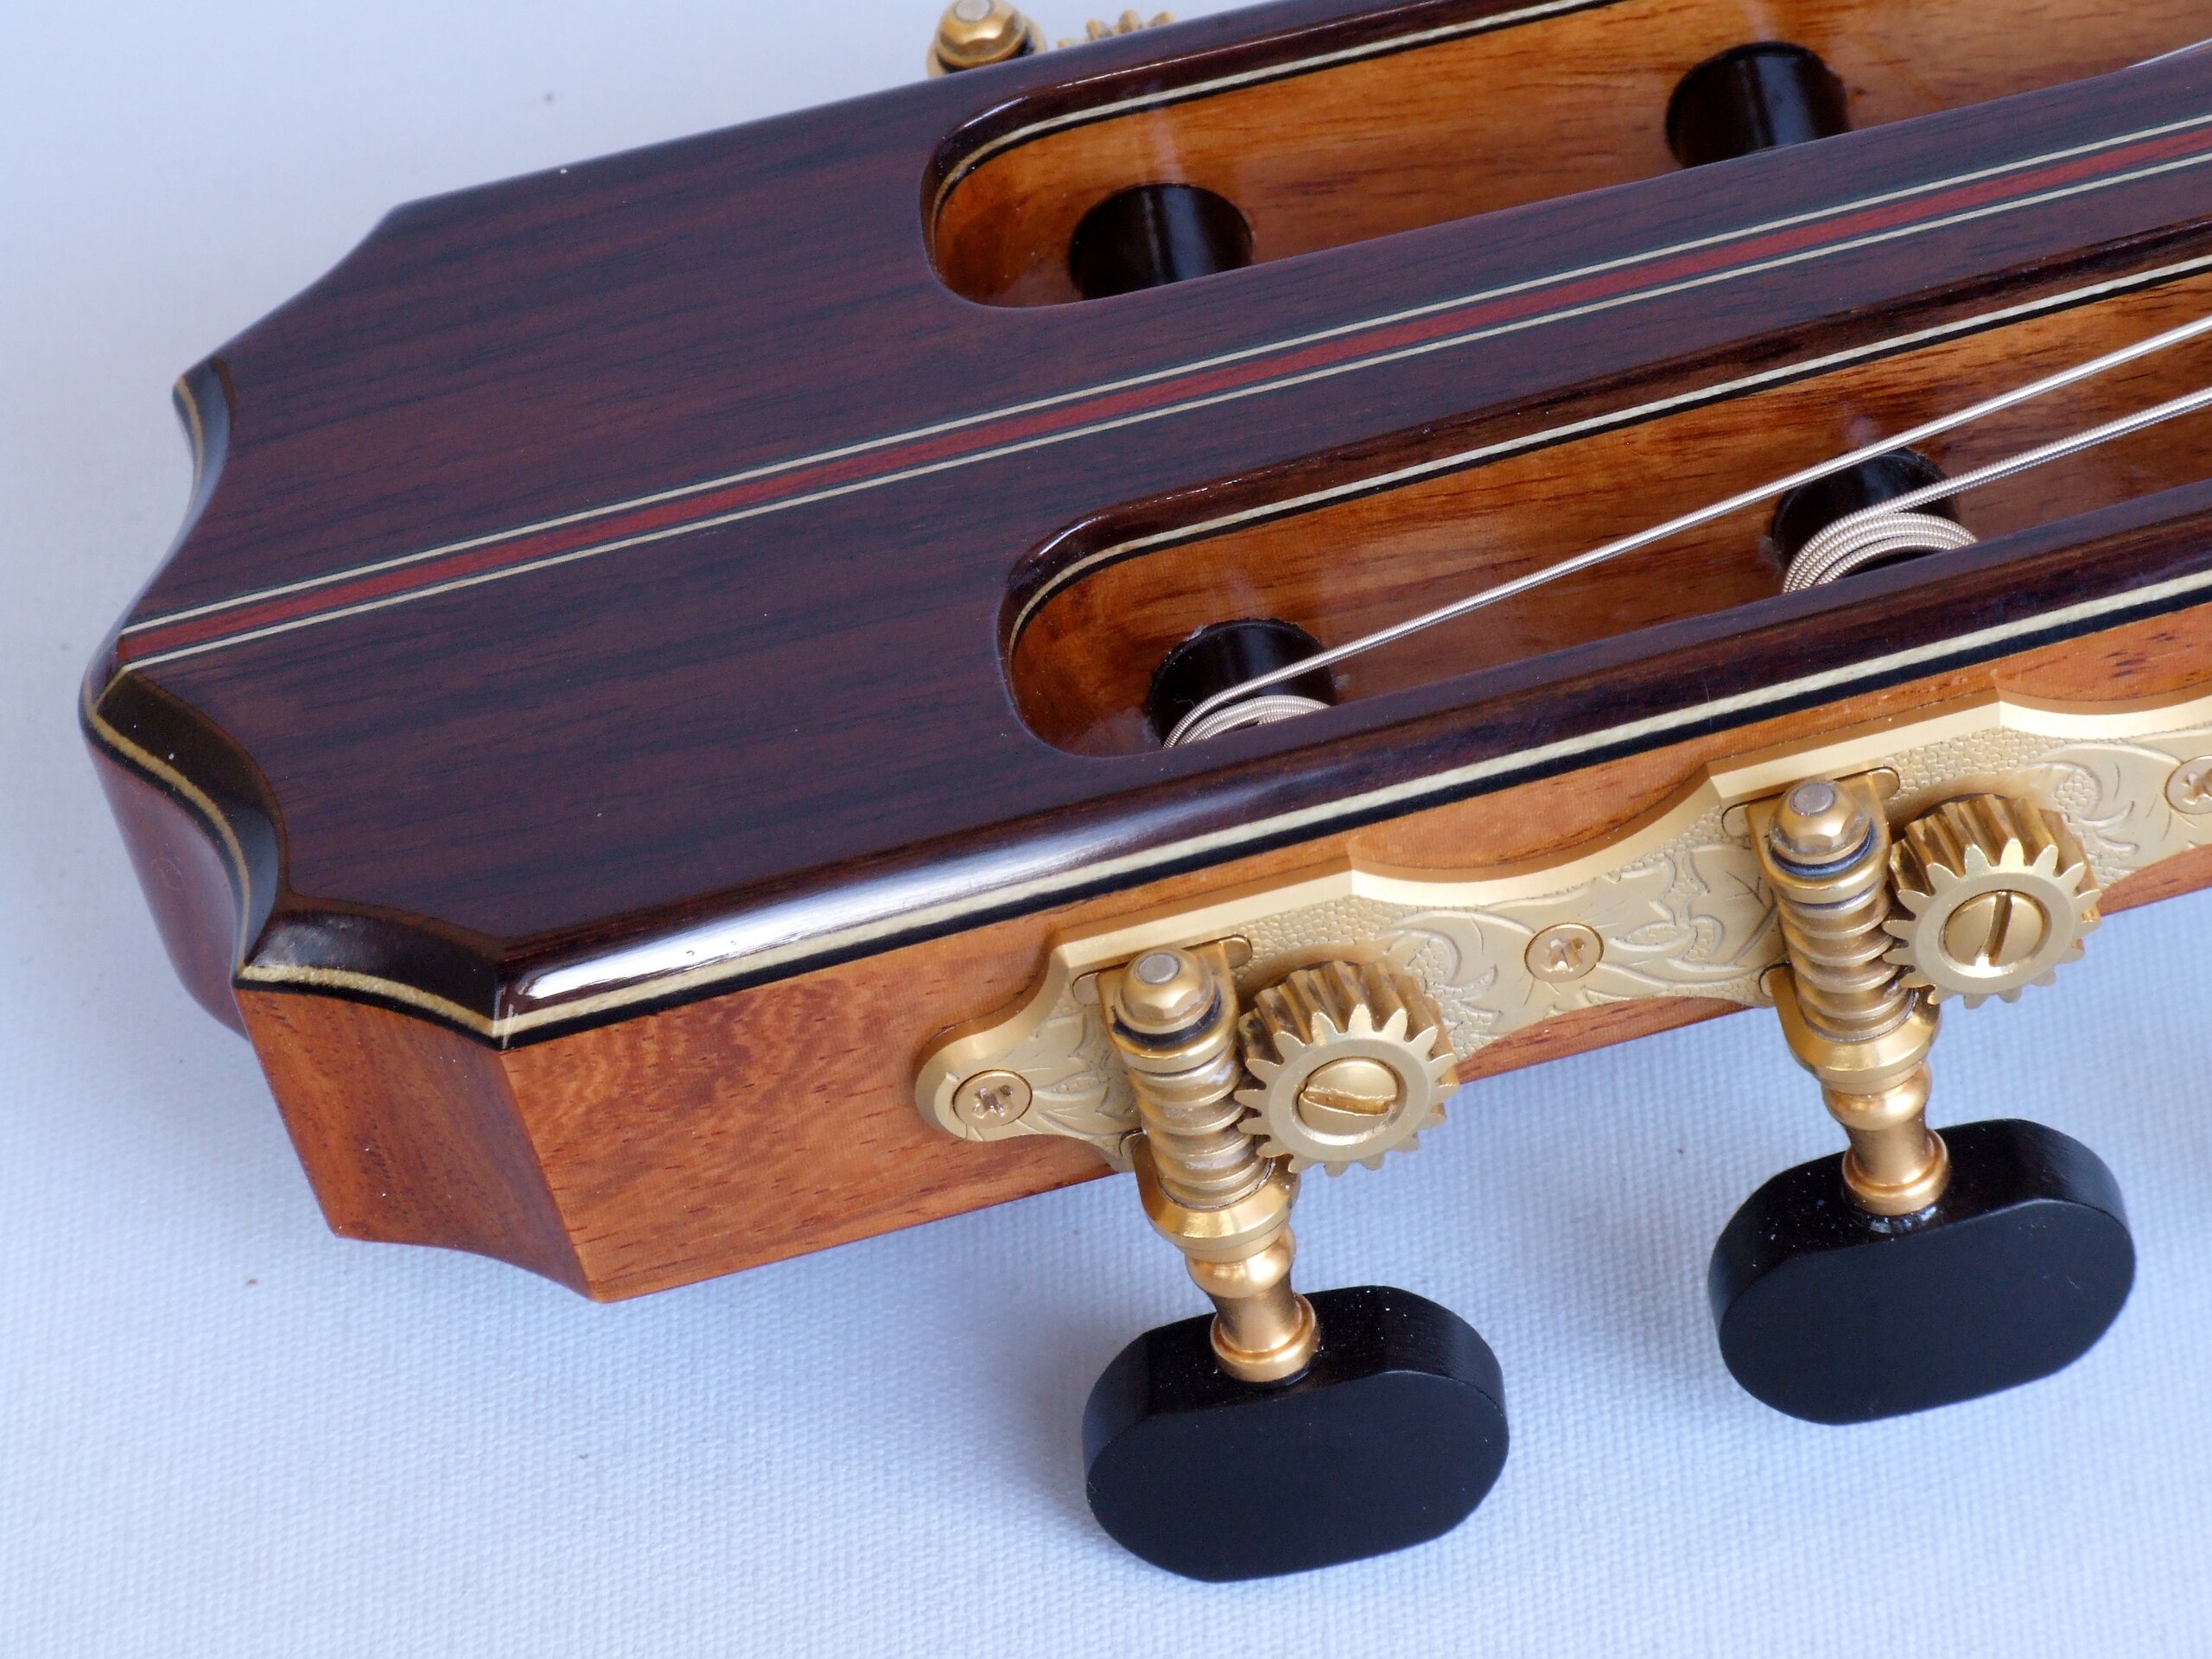 Detail of Gotoh tuners with ebony buttons on a classical guitar